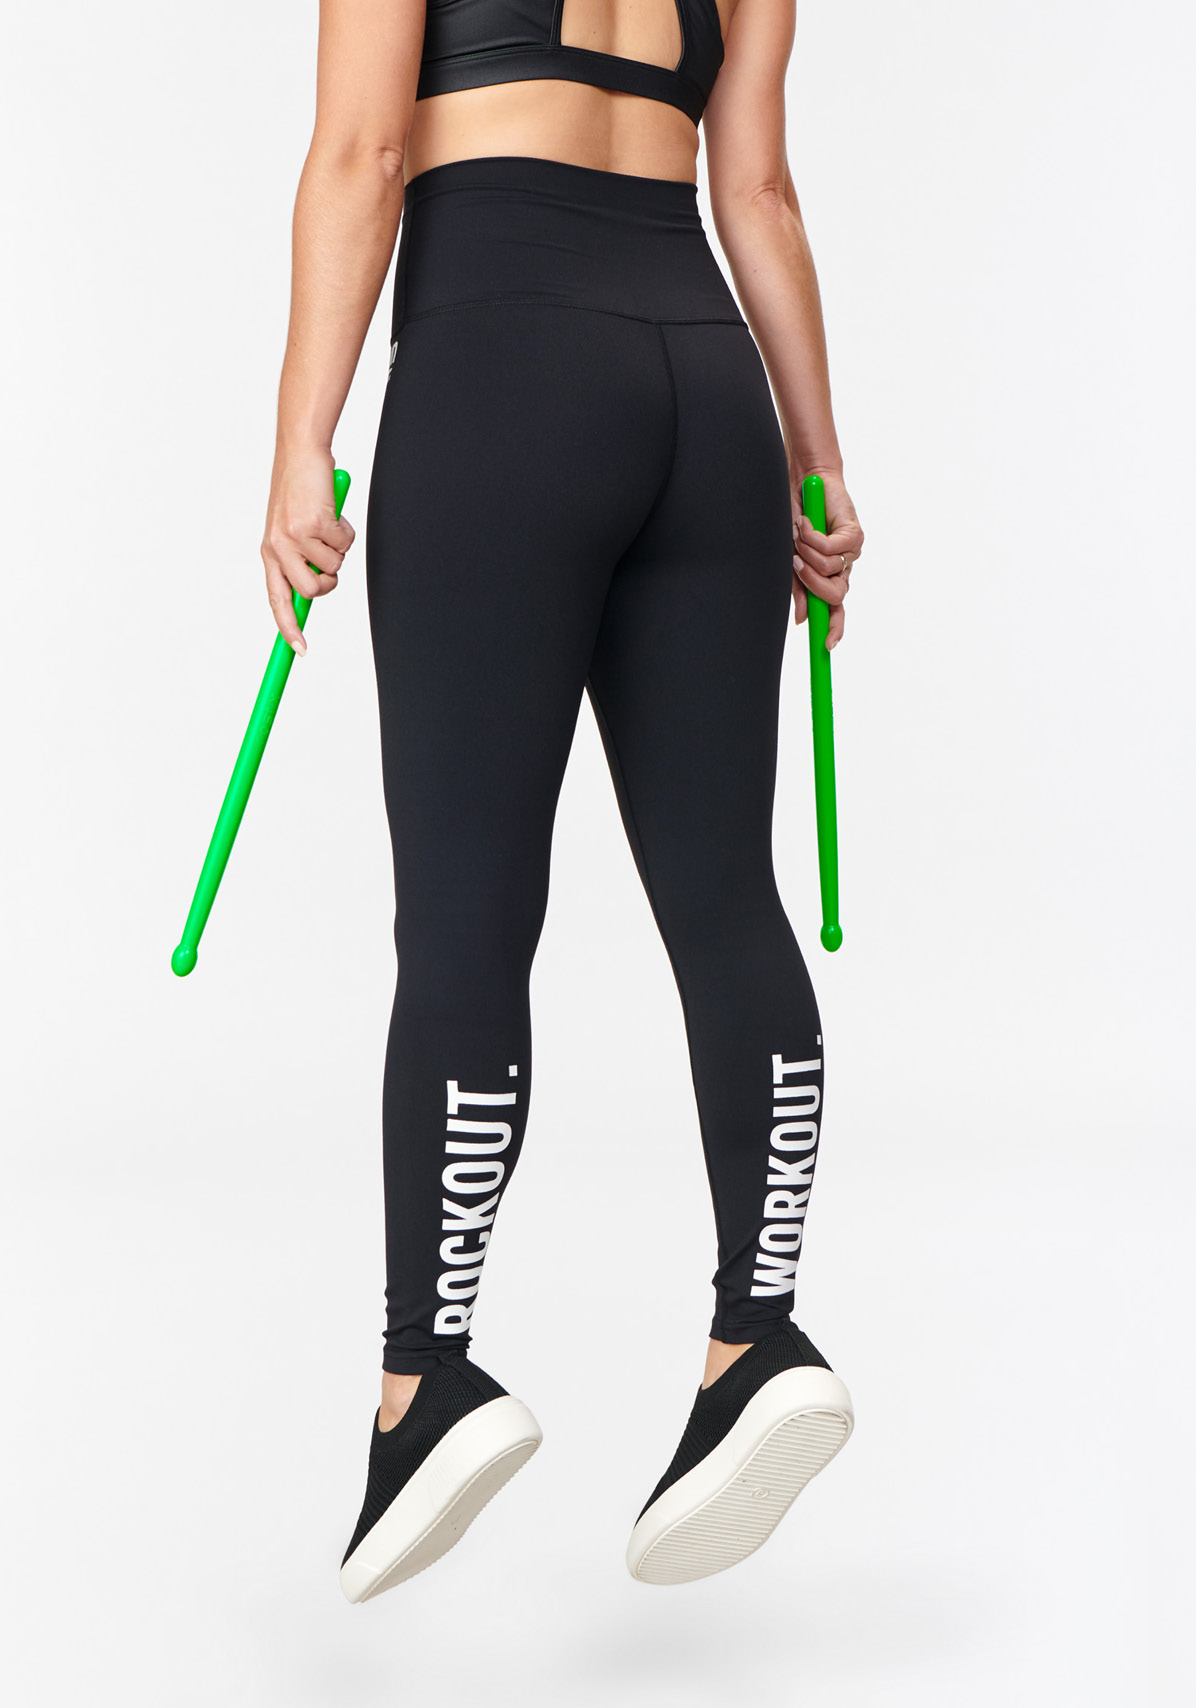 Where to buy workout leggings that actually fit